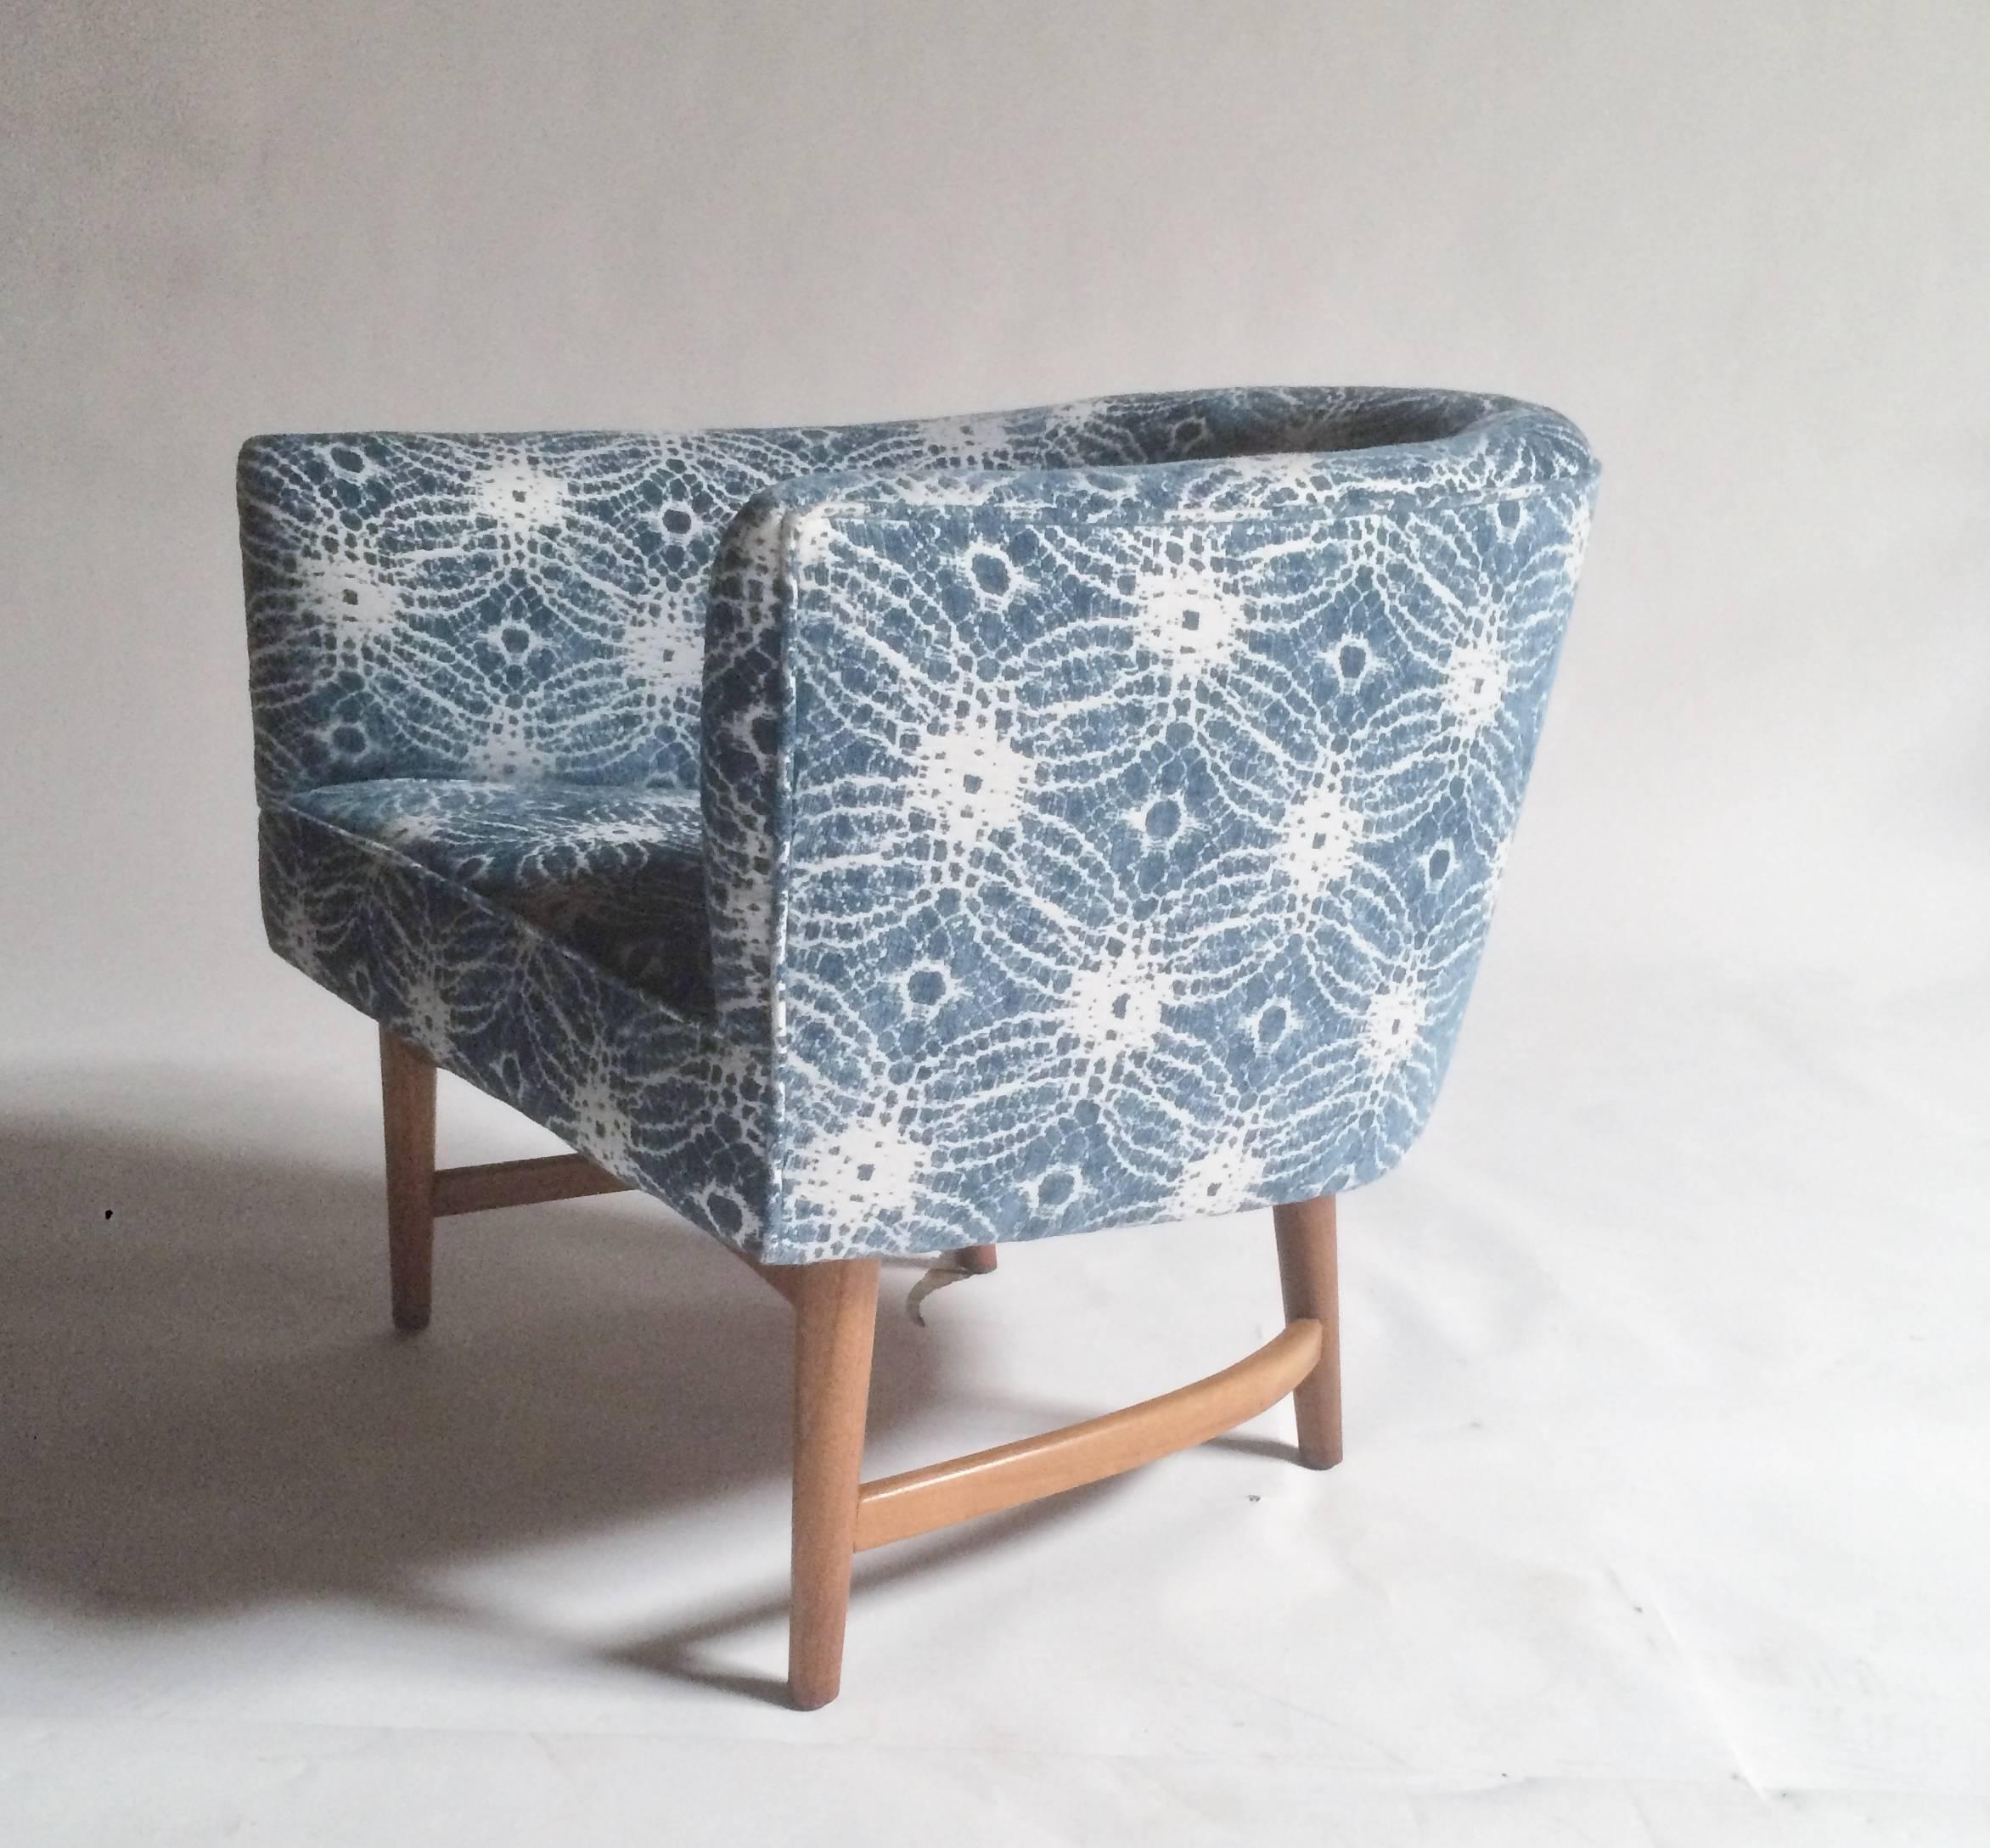 Mid-Century era compact barrel or tub chair on a walnut wood frame with rounded stretchers, designed by Lawrence Peabody for the Nemschoff Chair Company. This chair has been newly upholstered in a high-end fabric from Spain with a blue and white